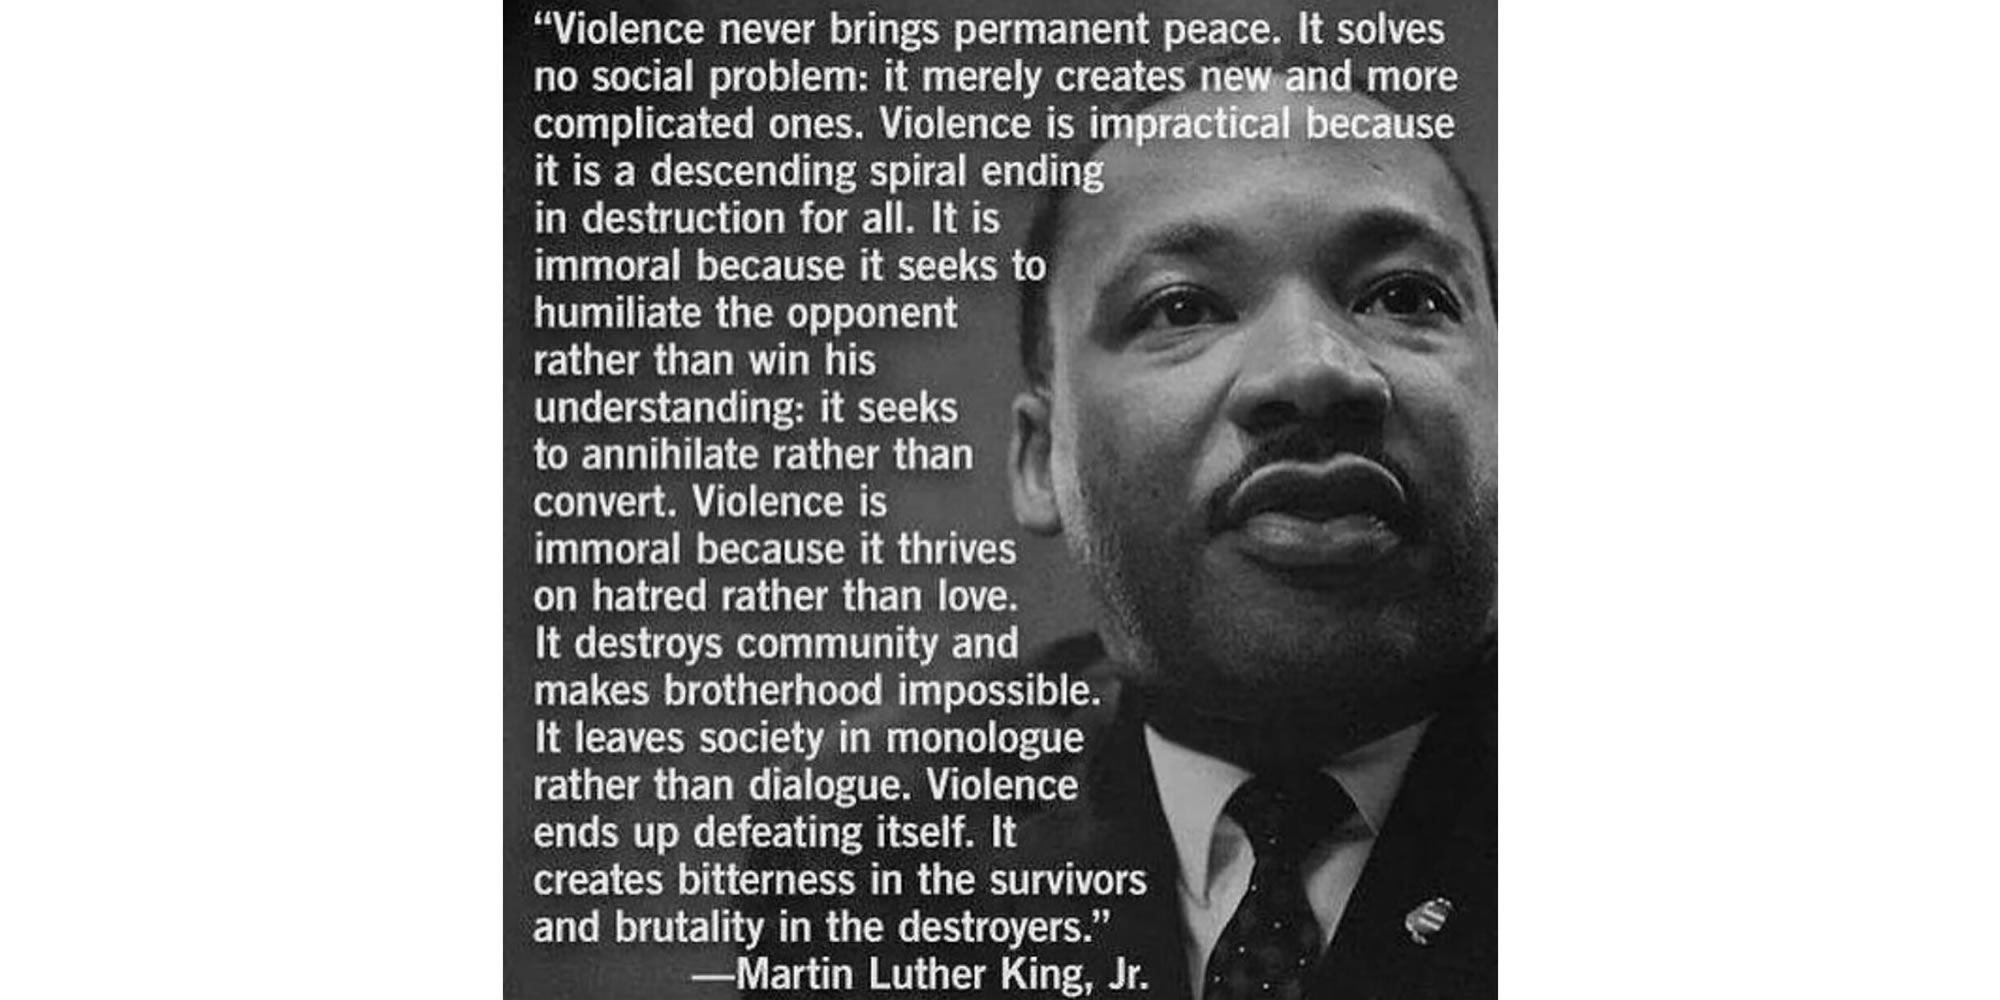 â€œViolence brings only temporary victories; violence, by creating many more social problems than it solves, never brings permanent peace.â€